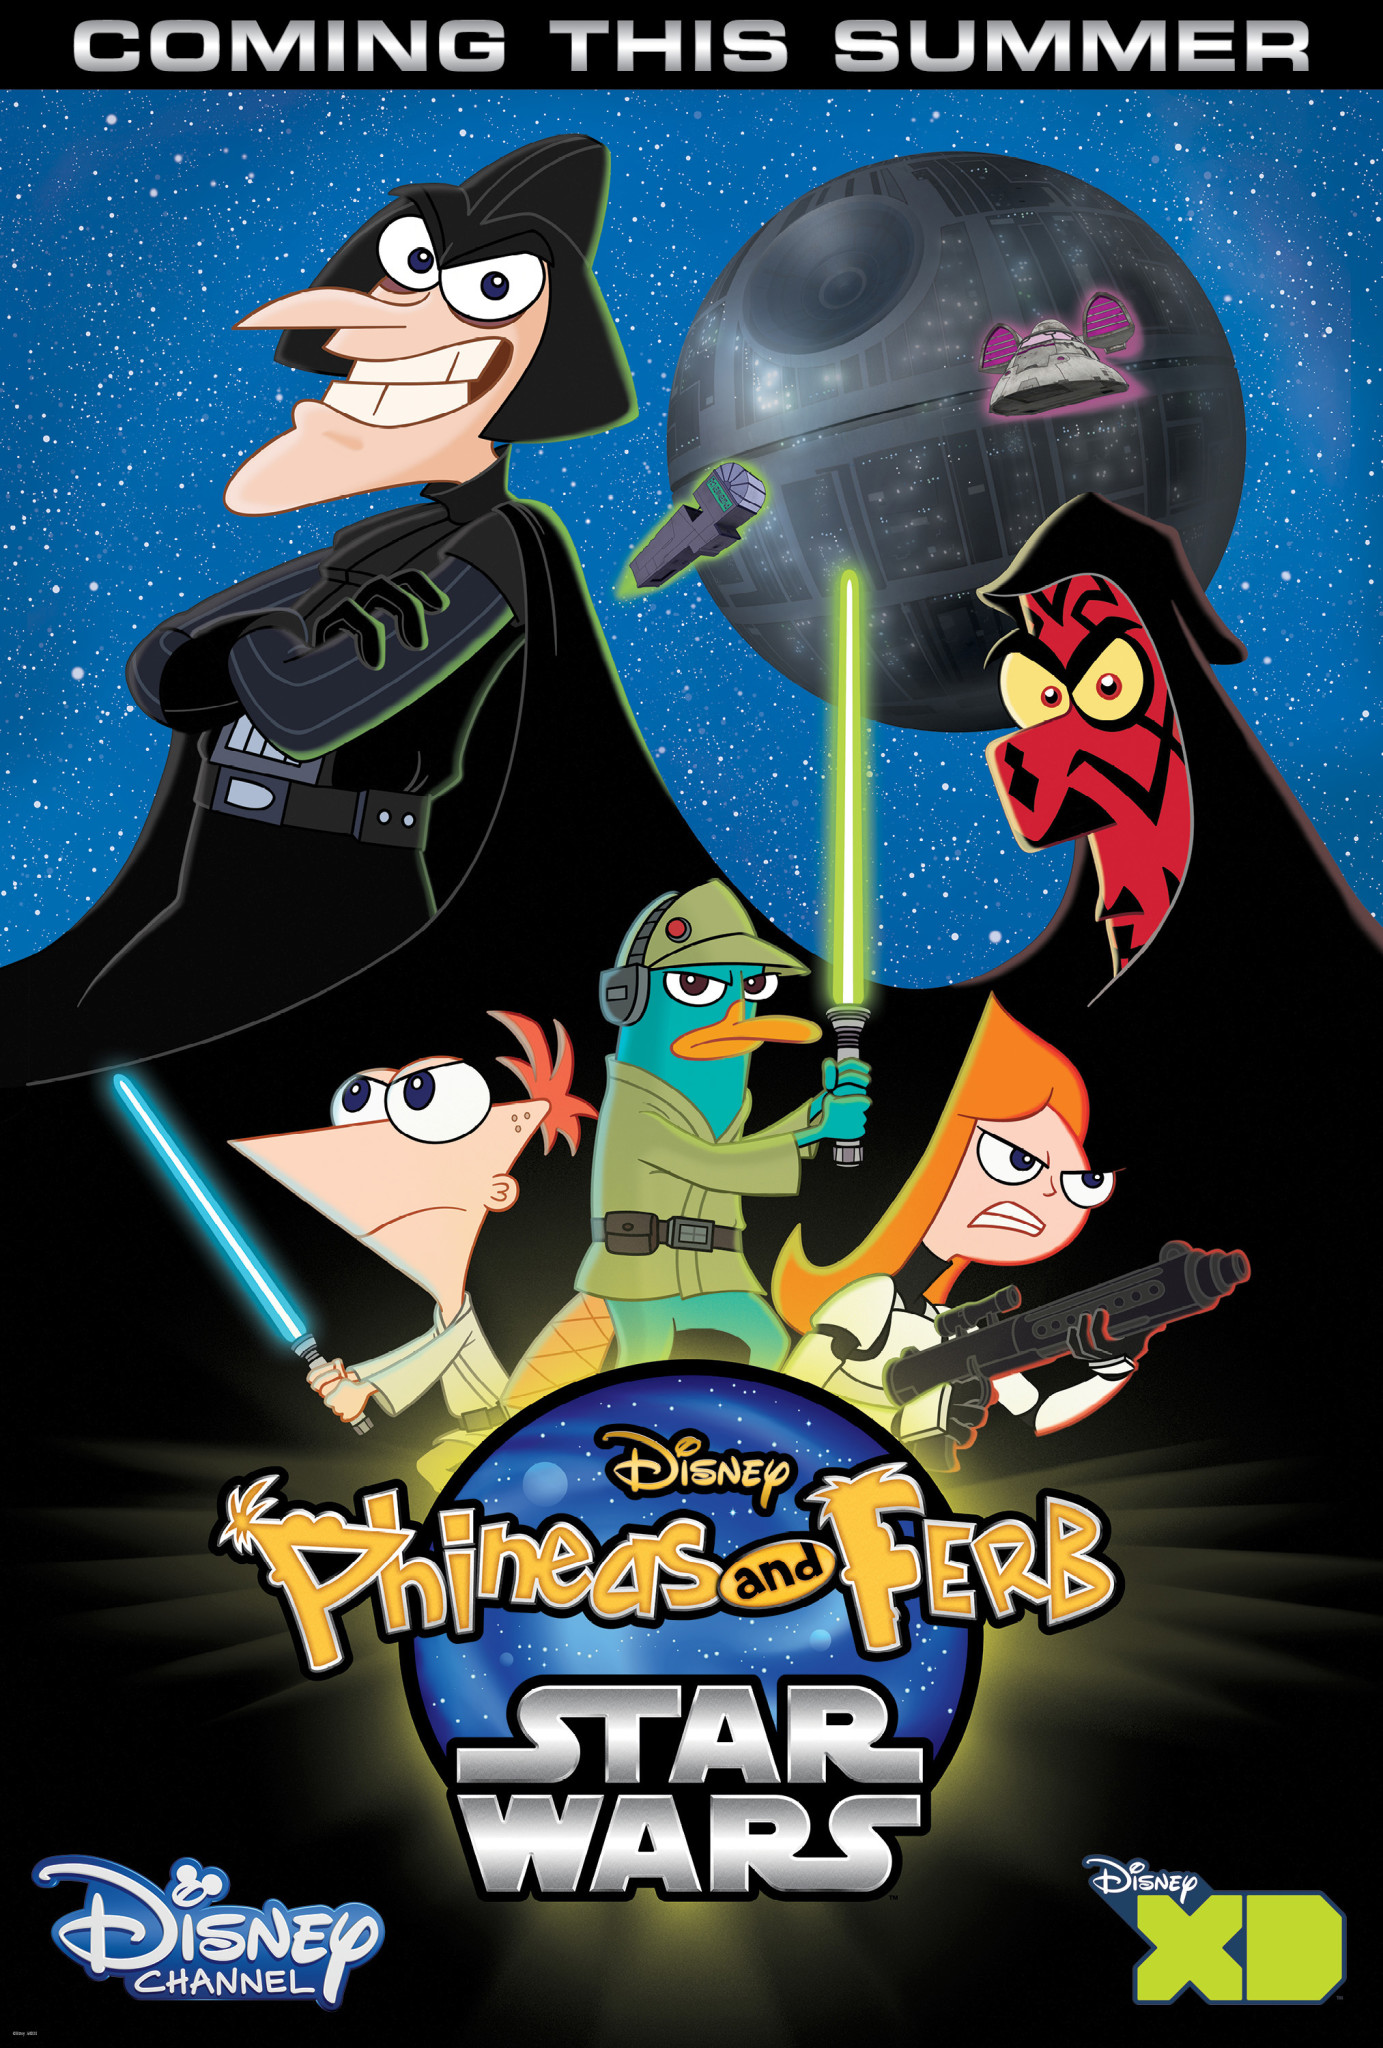 Move Over Star Wars Rebels, Phineas and Ferb are Here to Save Summer.